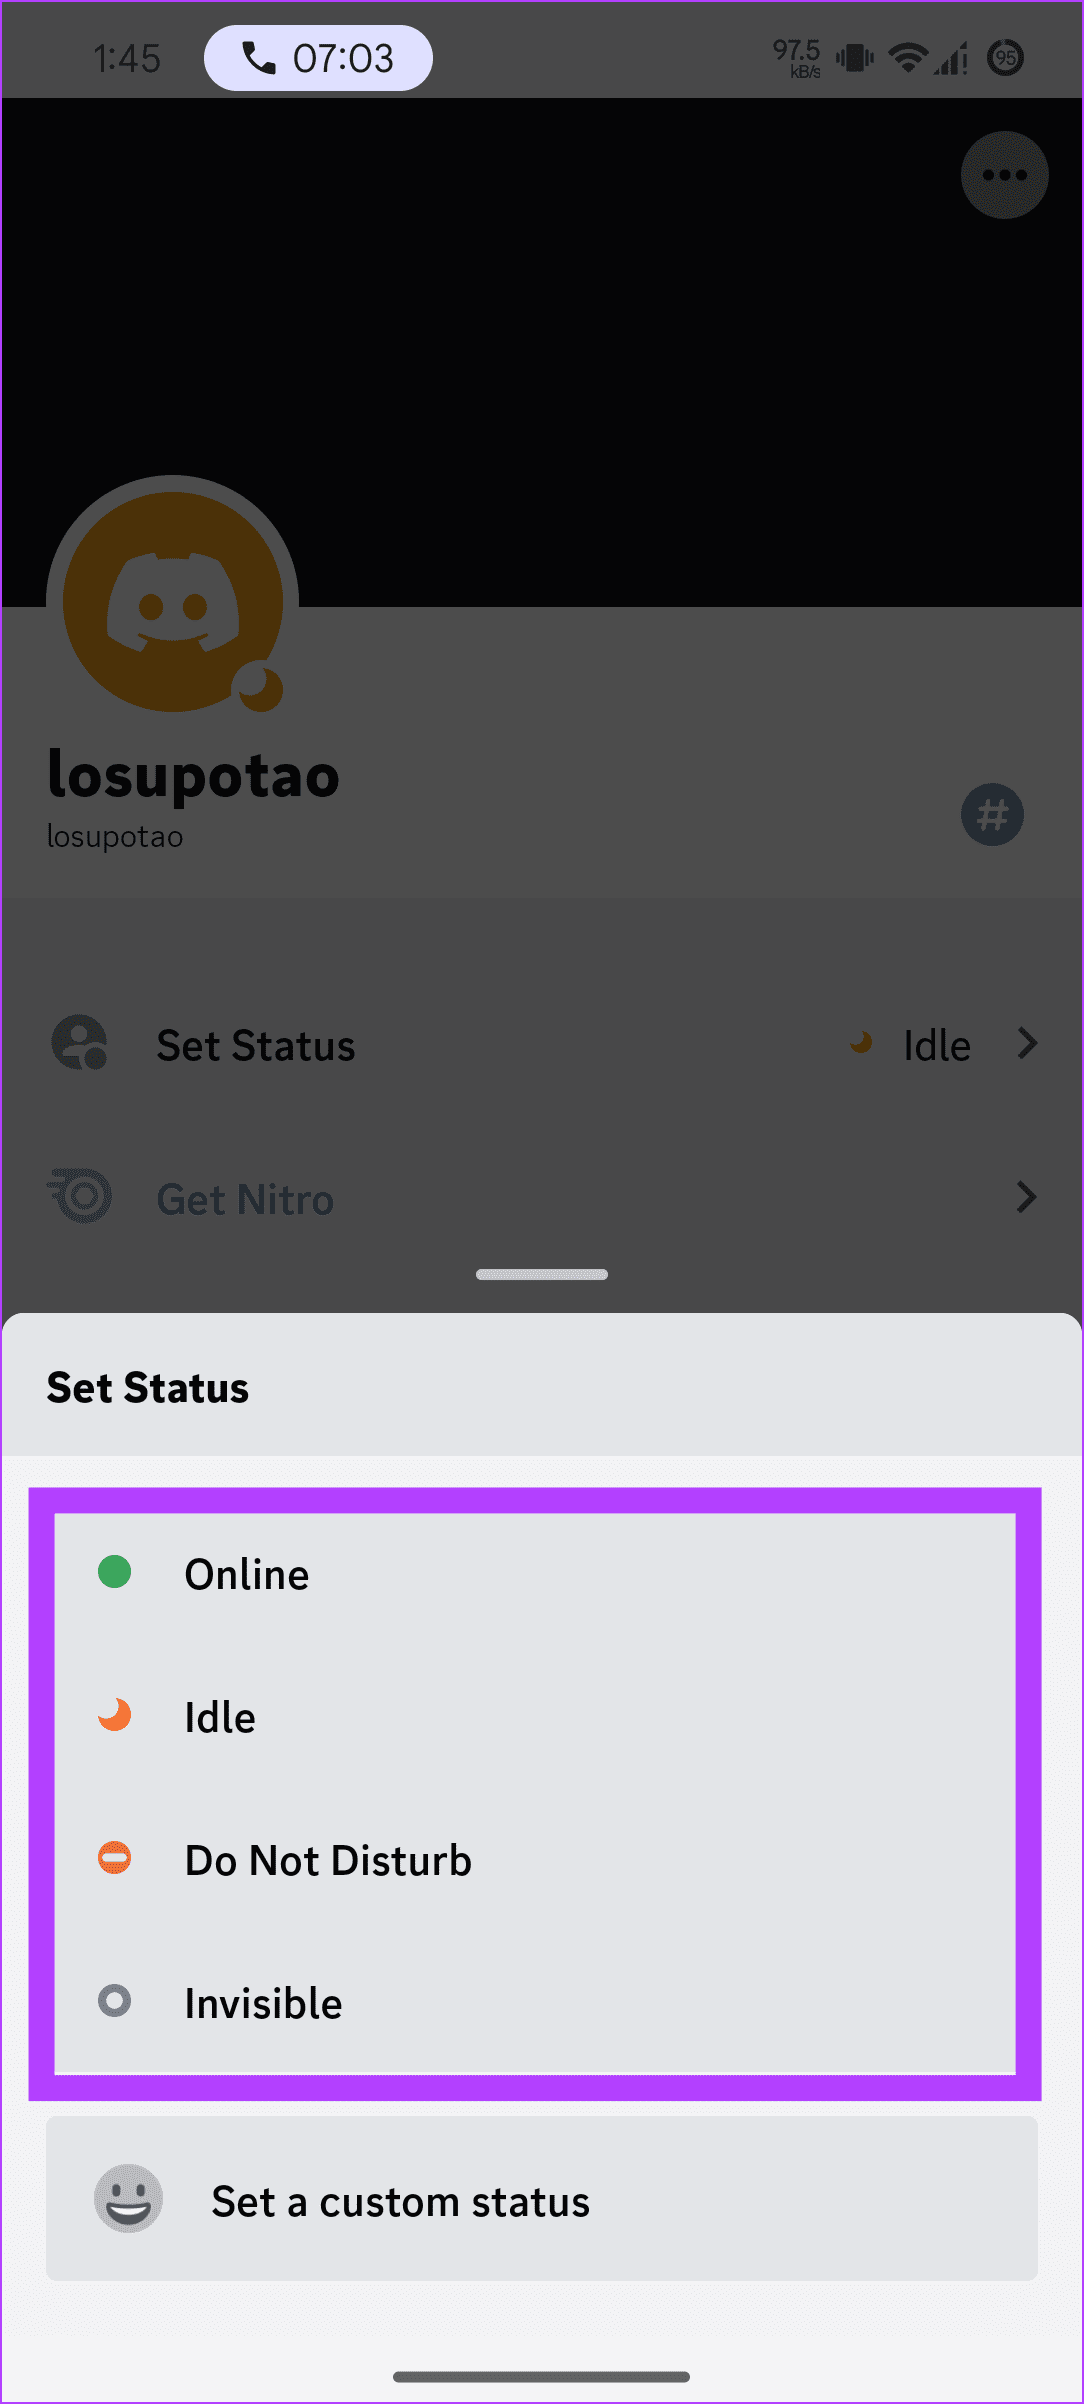 Choose any of the status options